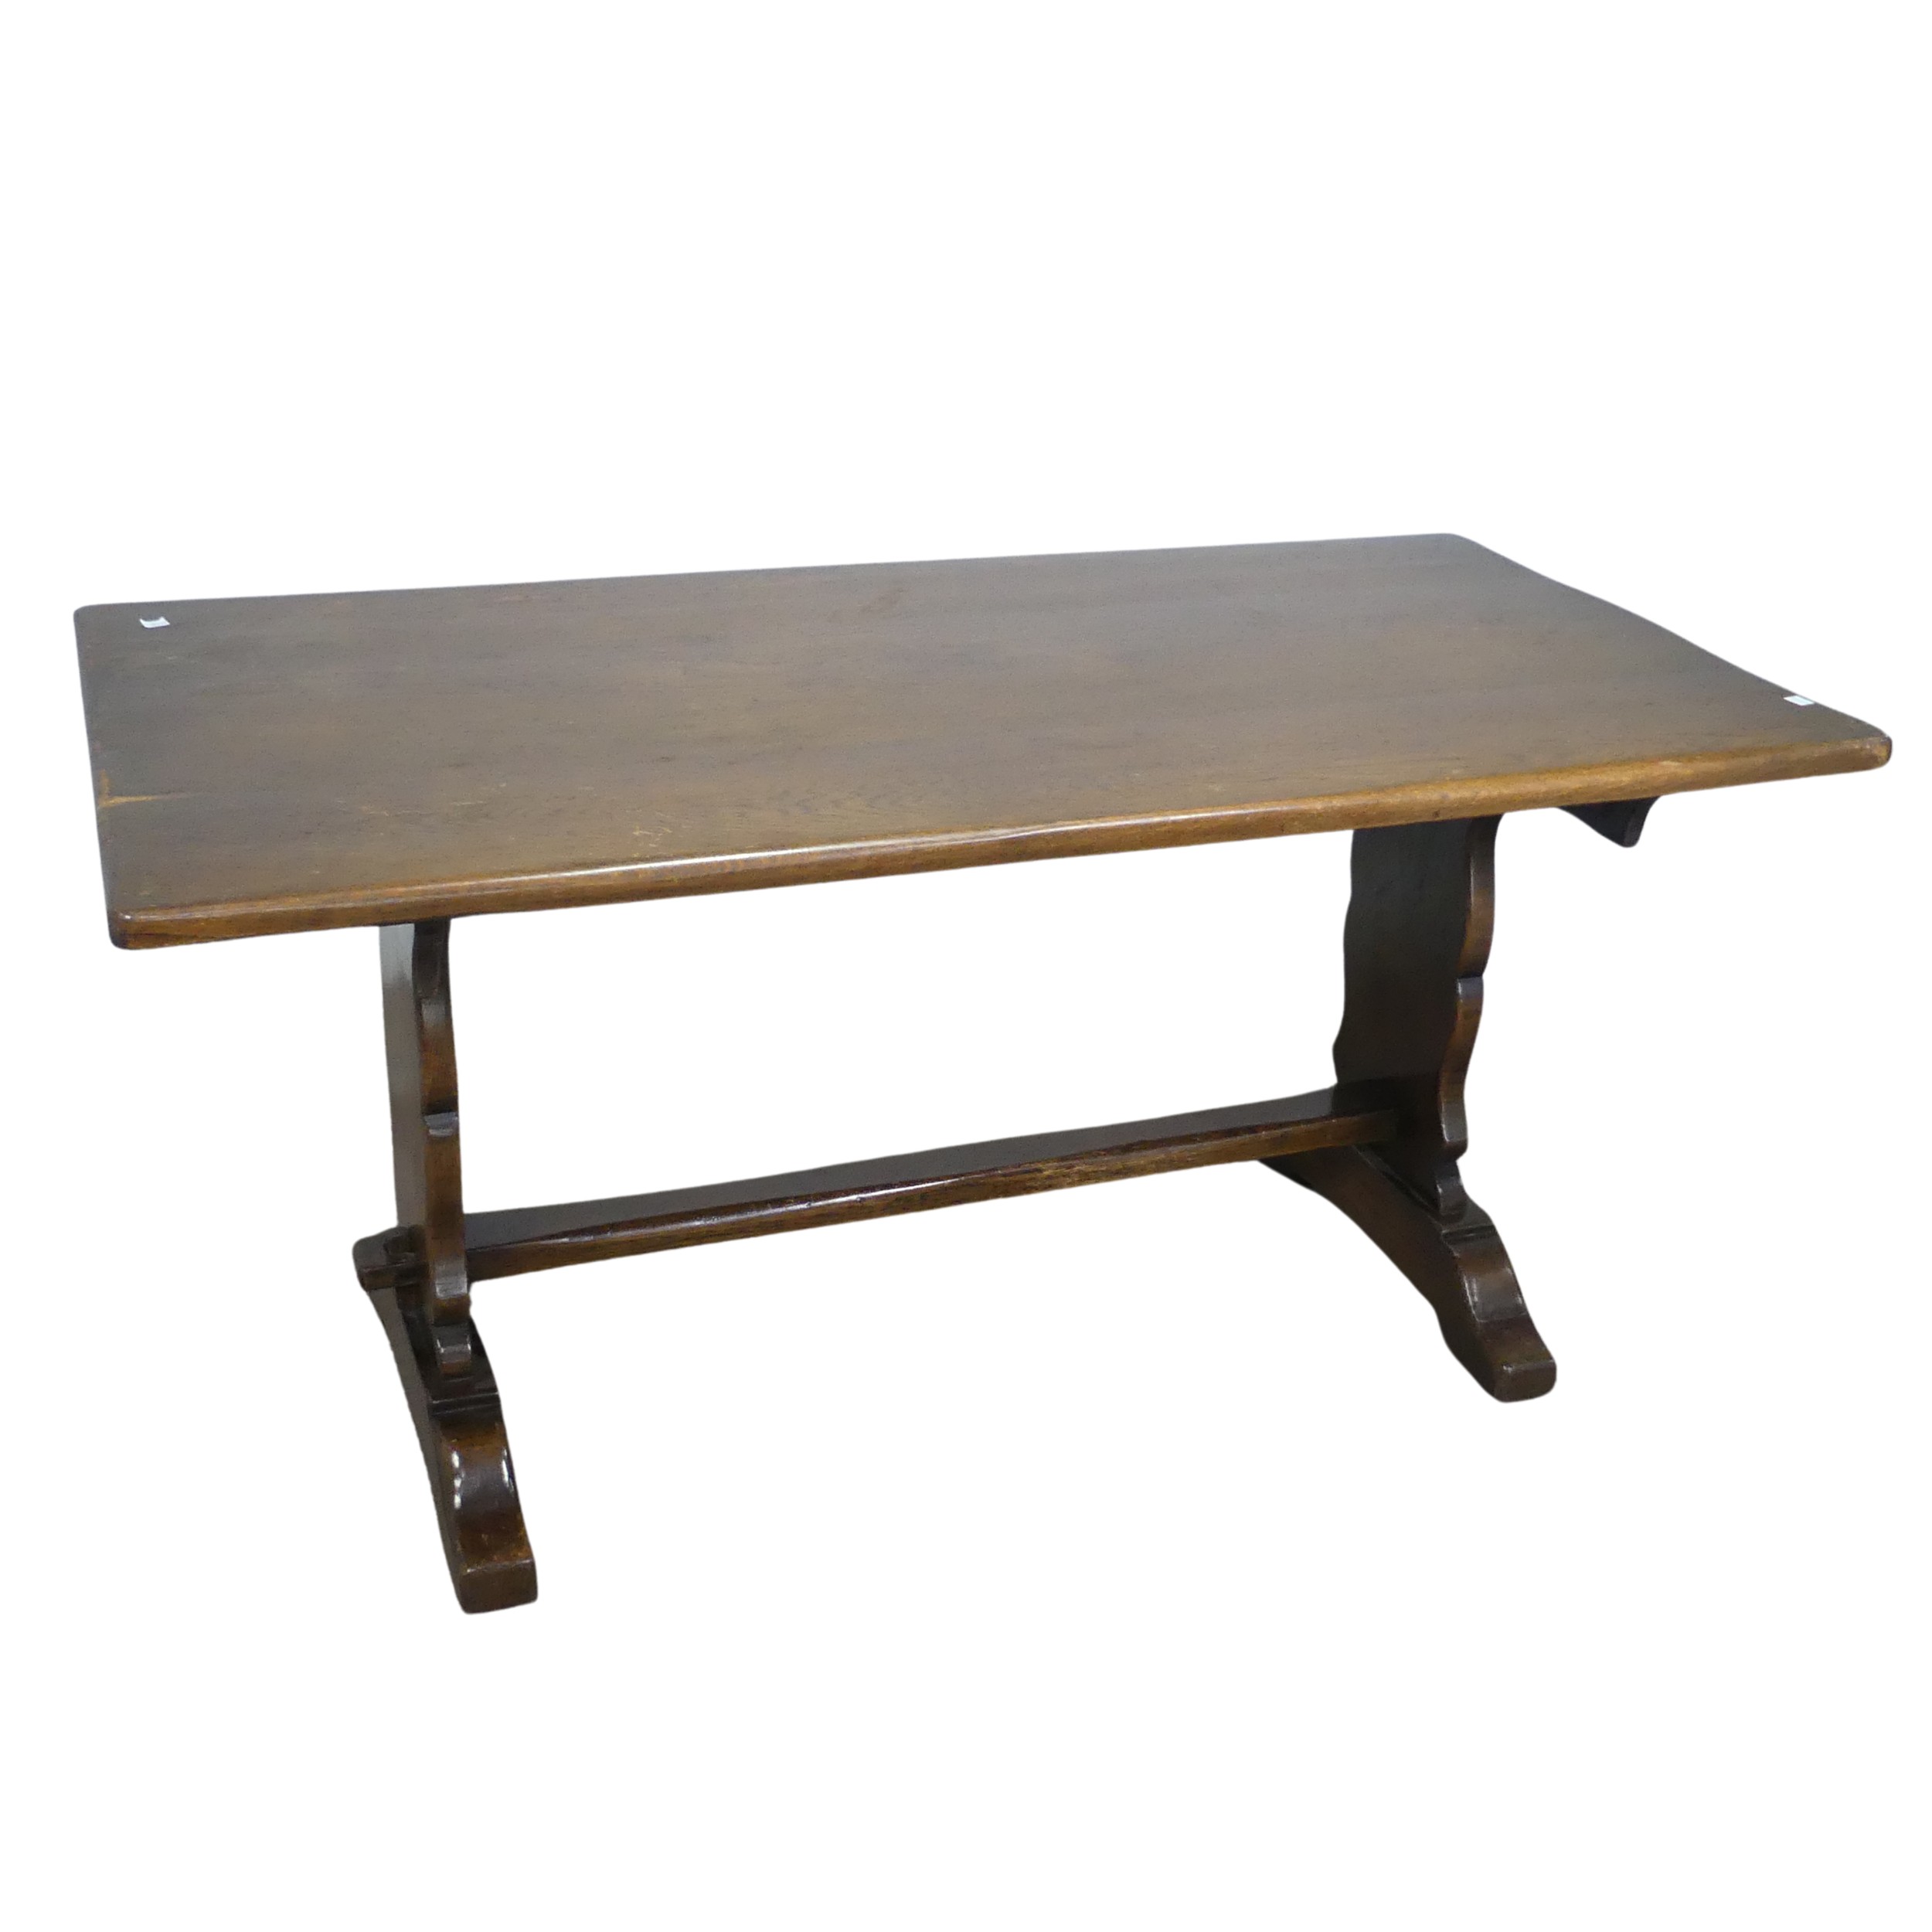 A craftsman style oak refectory dining Table, retailed by 'Shepherd & Hedger, Southampton', label to